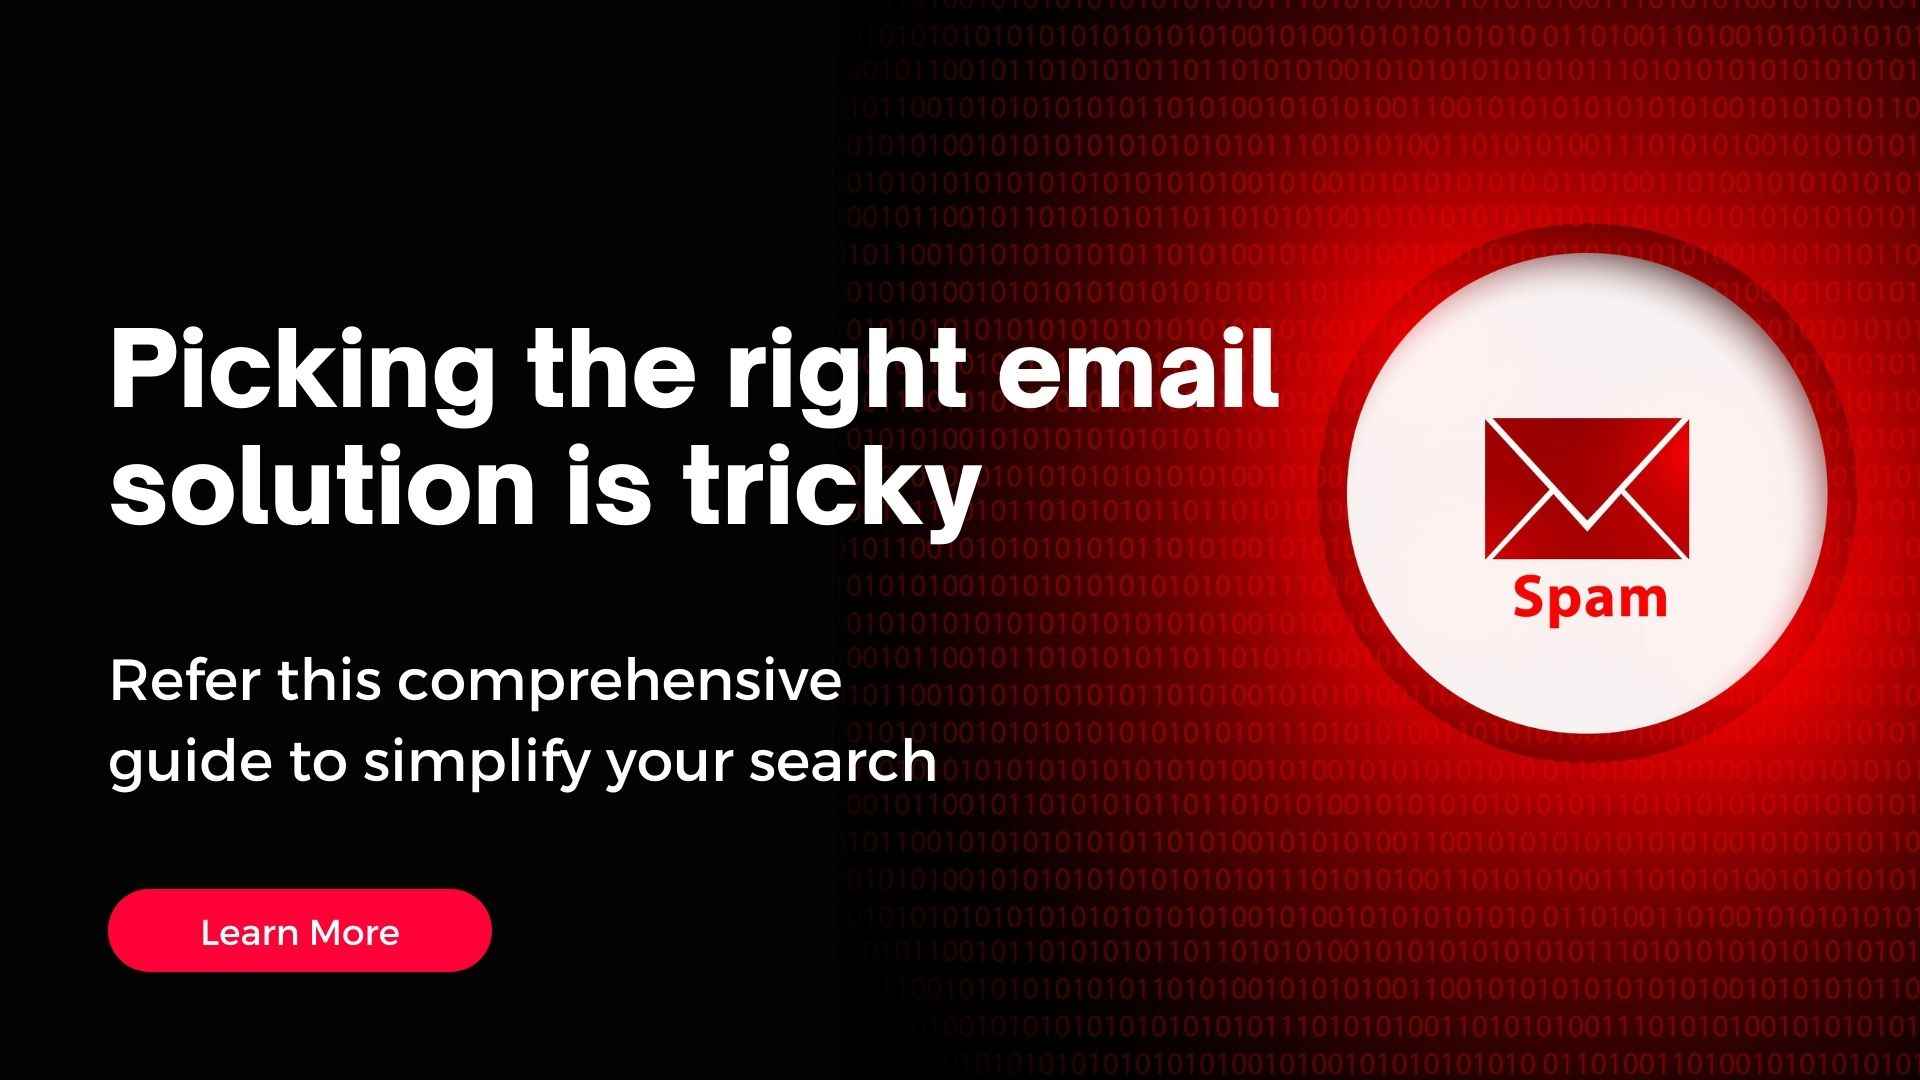 Picking the right email solution is tricky